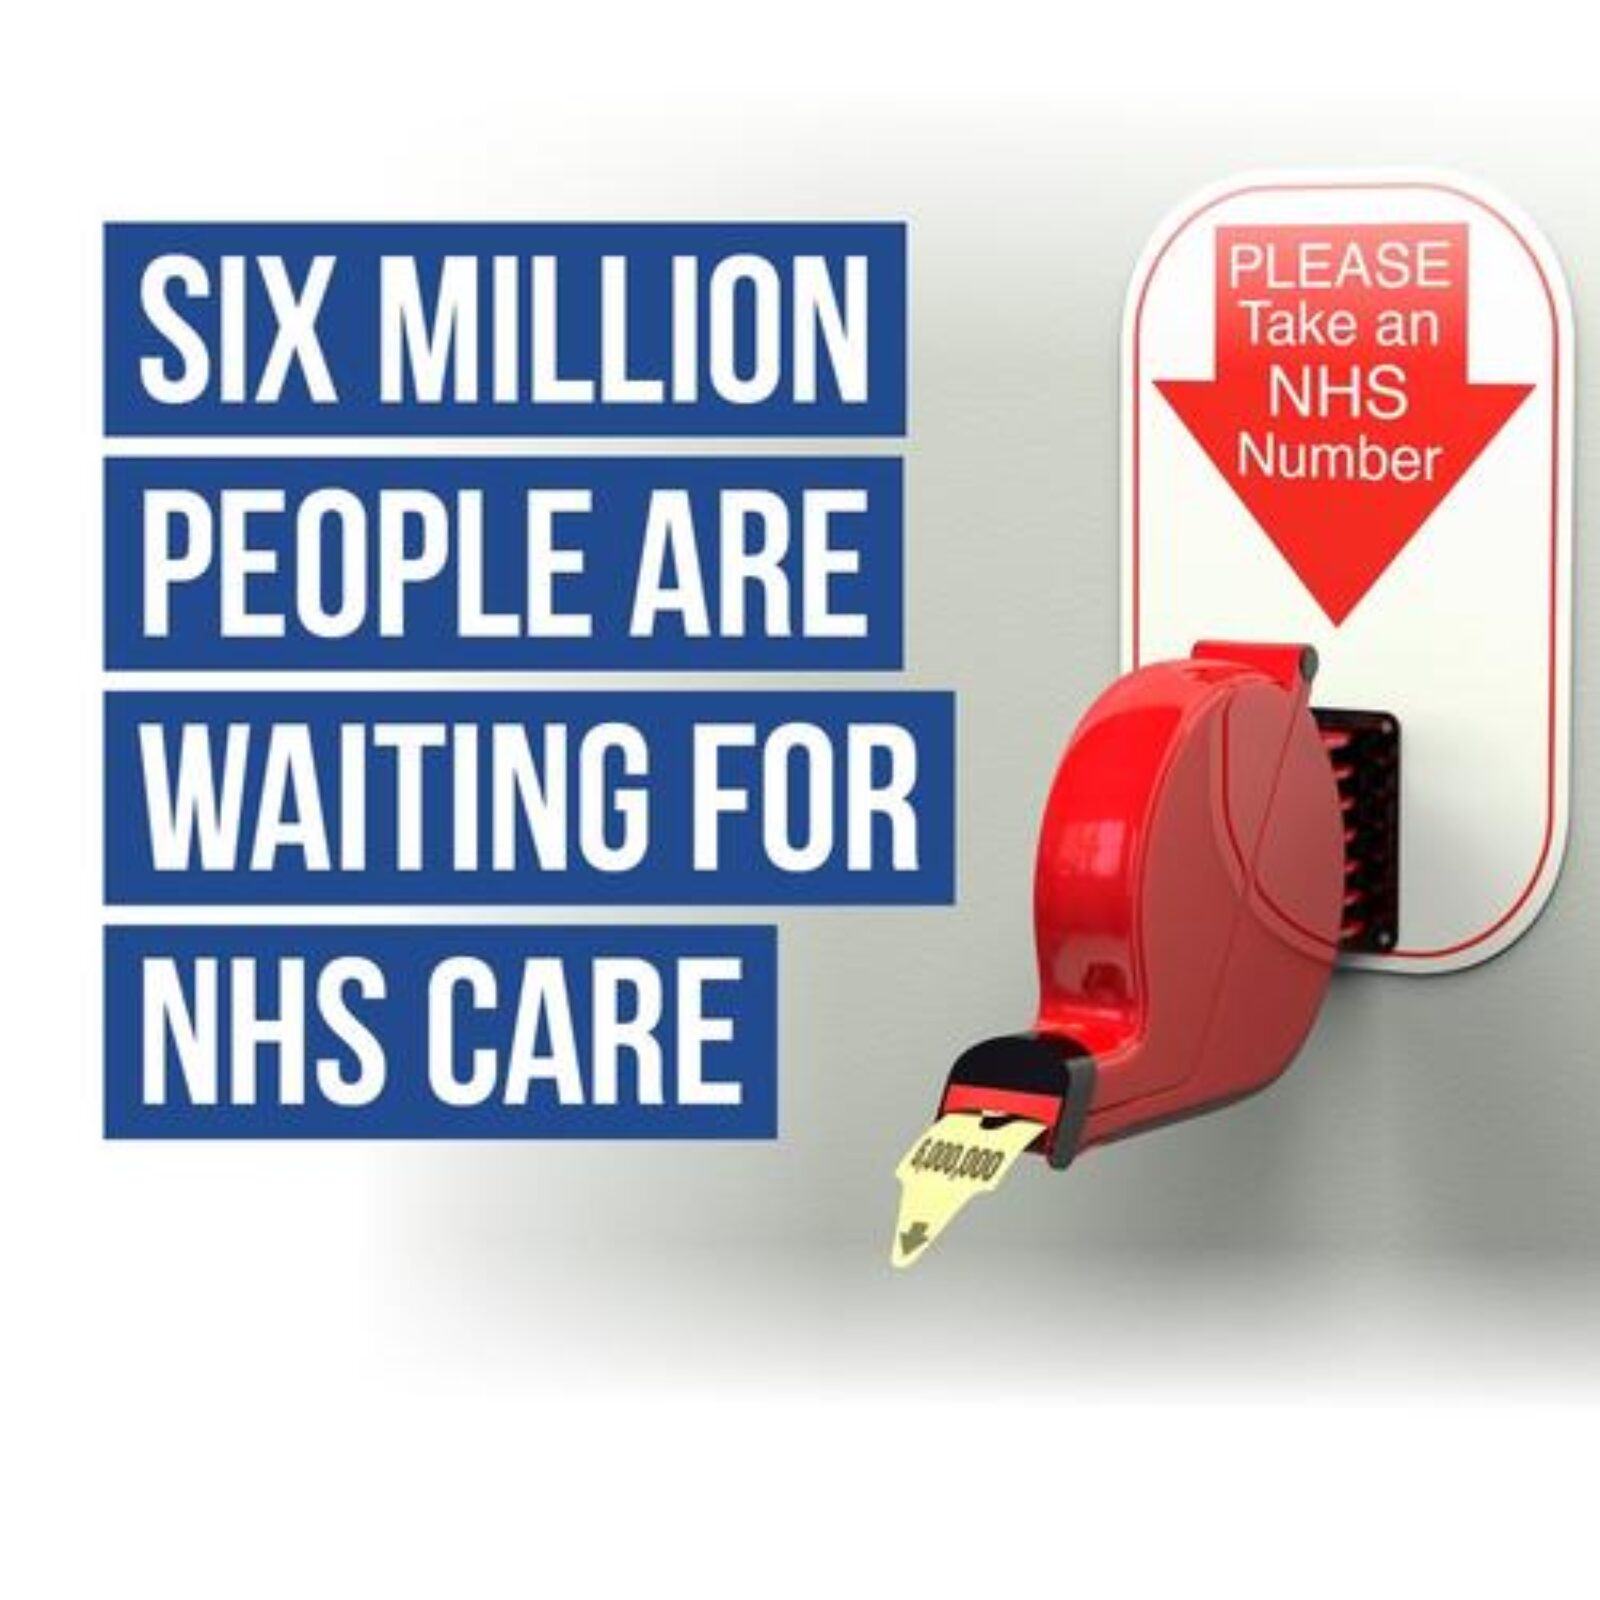 People are waiting for NHS care